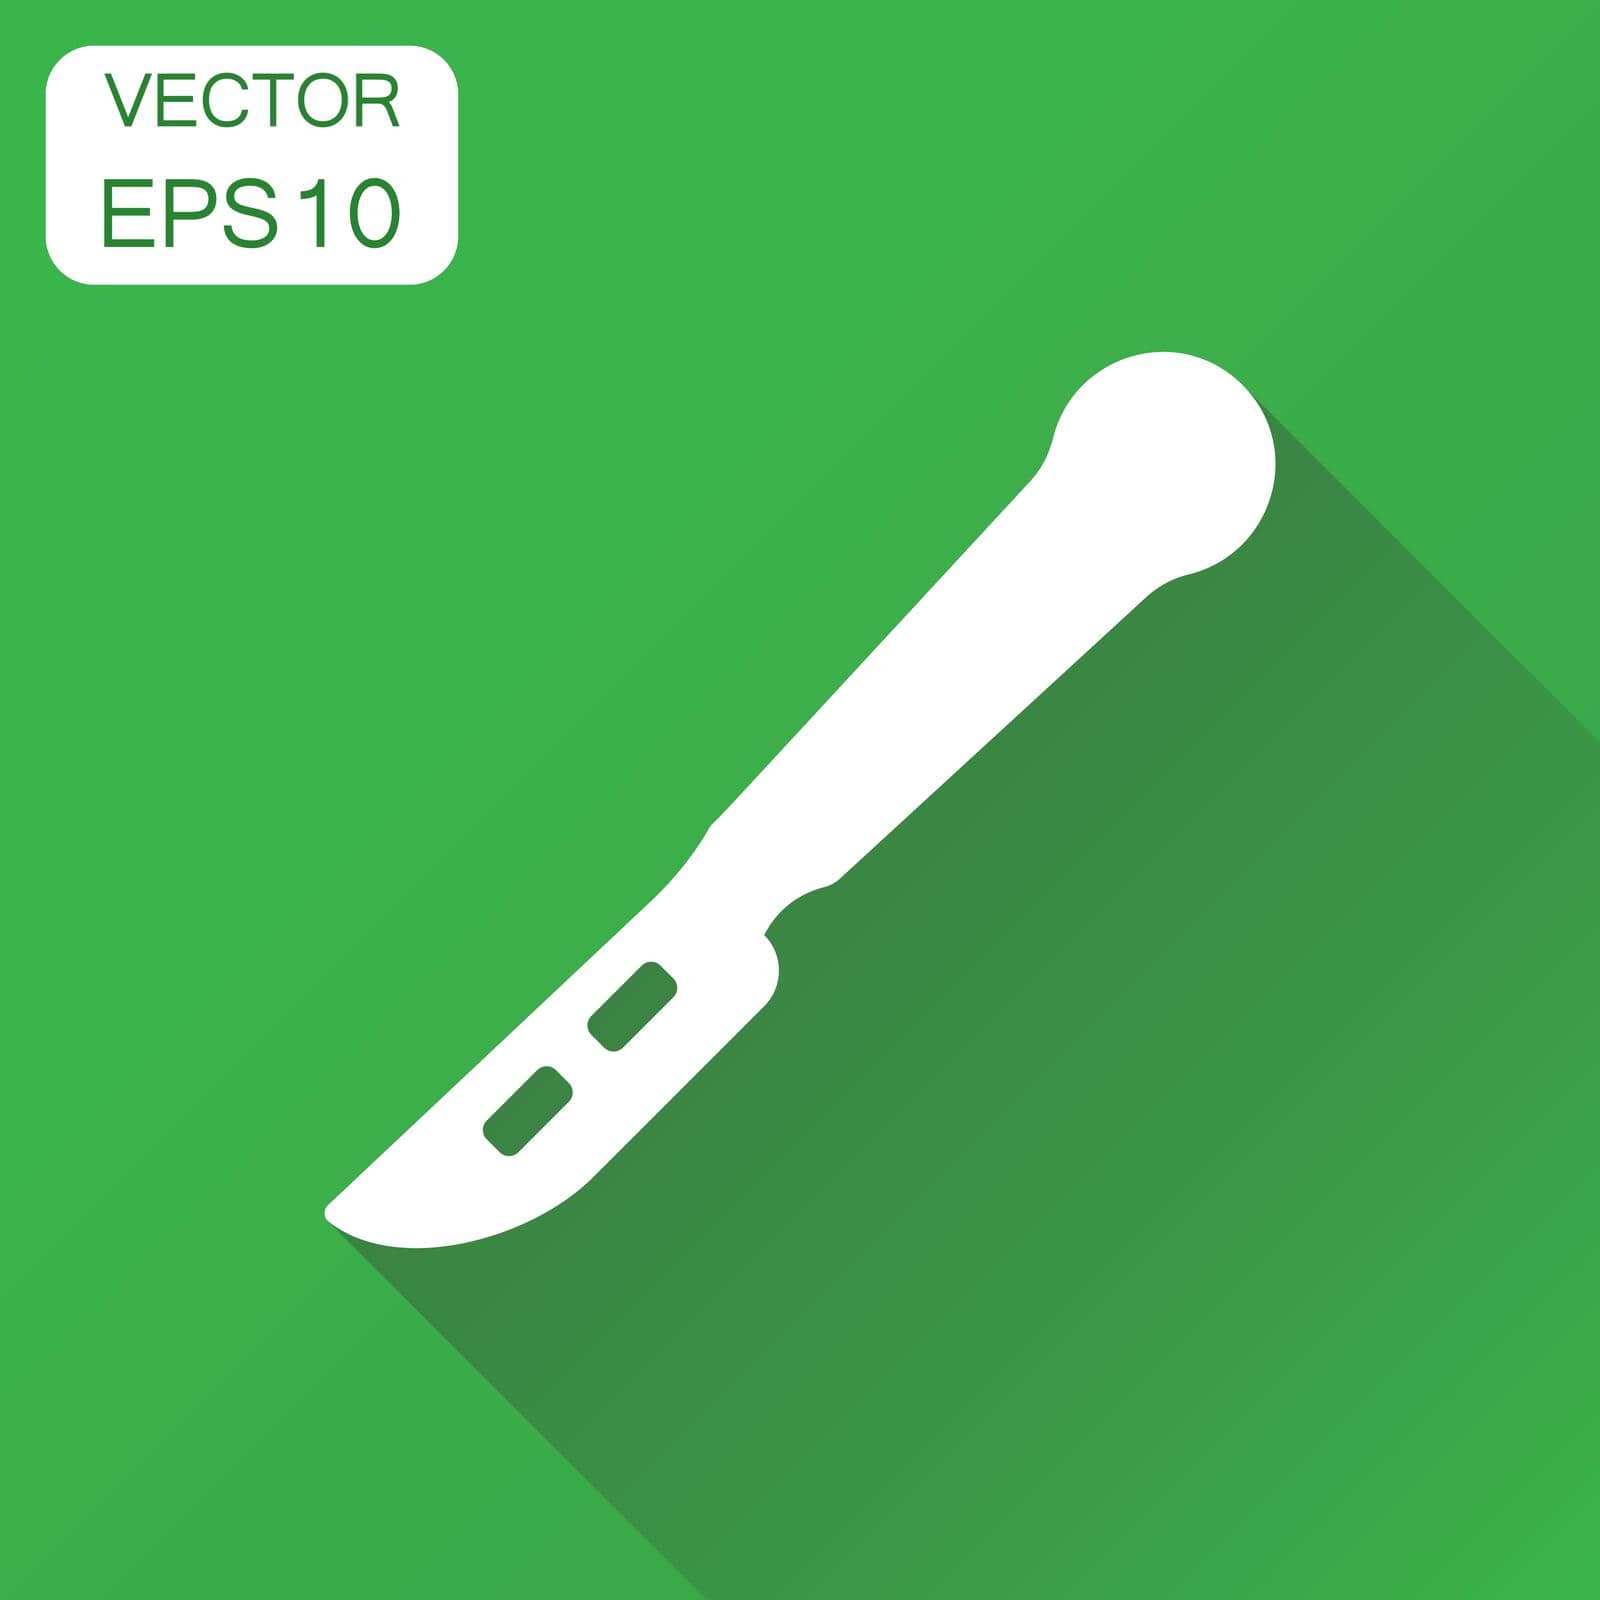 Medical scalpel icon. Business concept hospital surgery knife pictogram. Vector illustration on green background with long shadow.